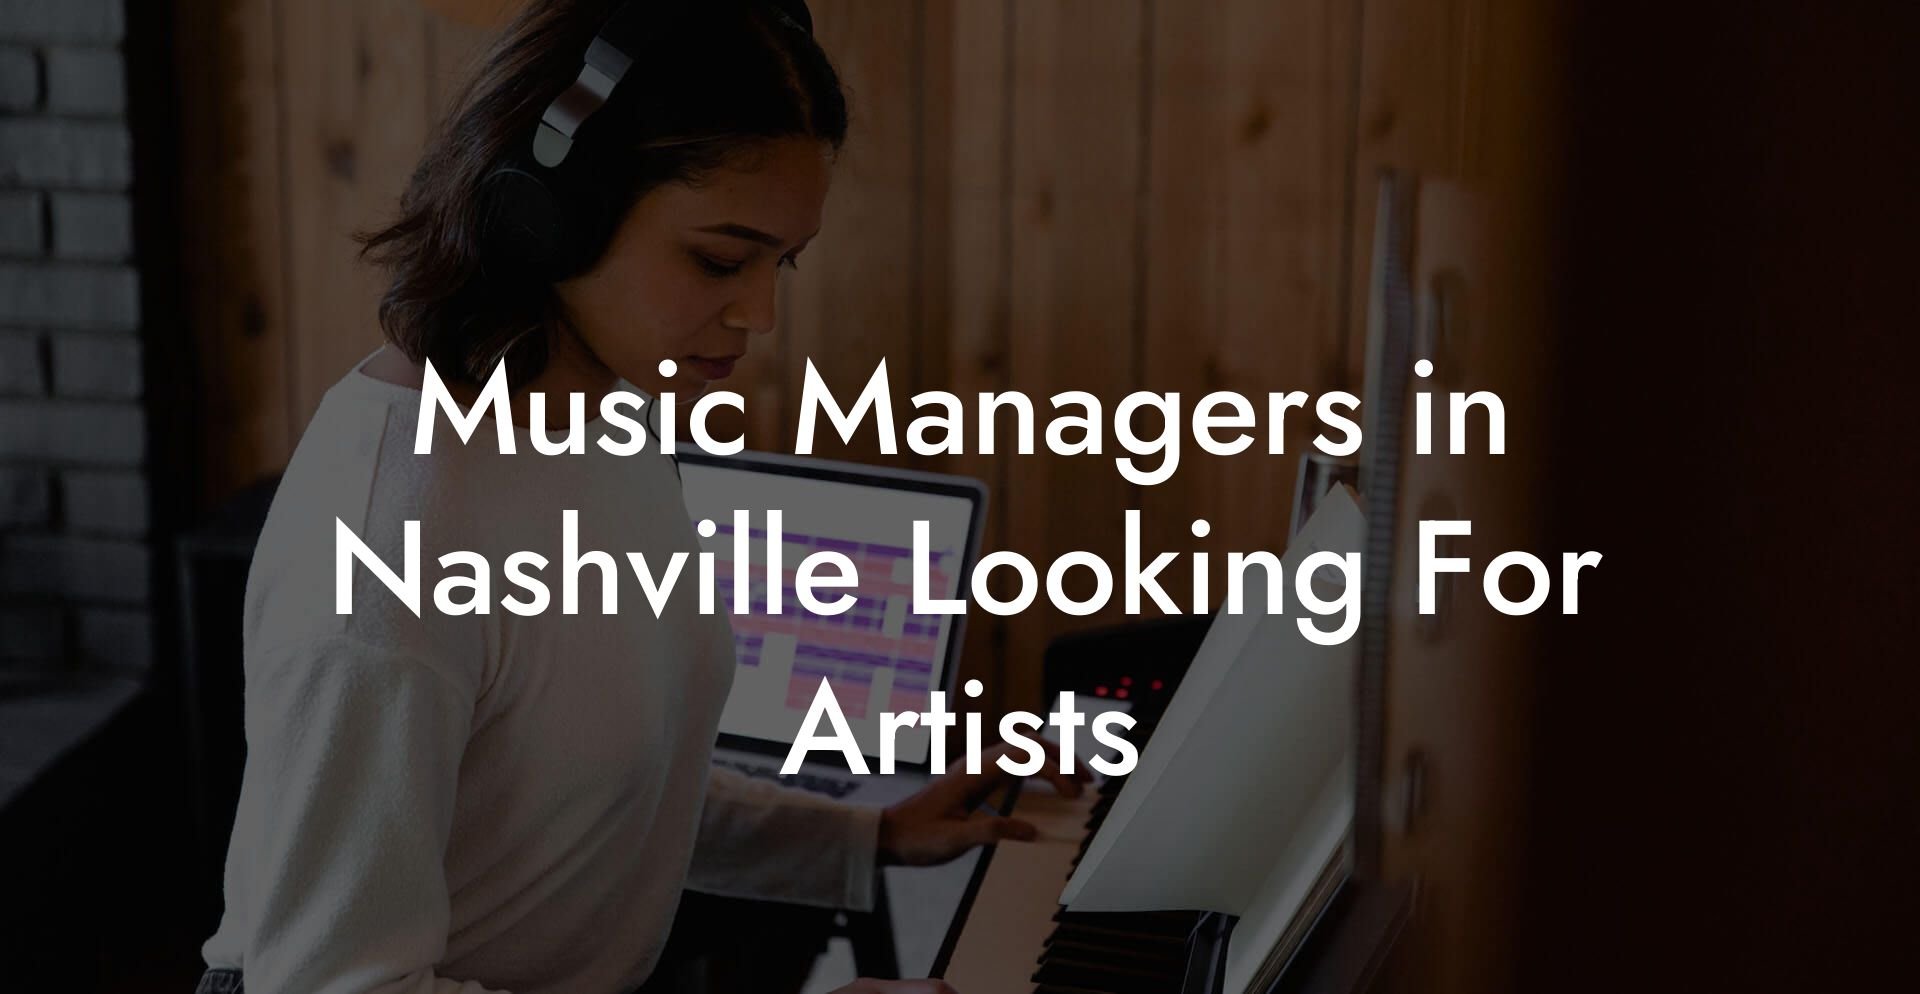 Music Managers in Nashville Looking For Artists